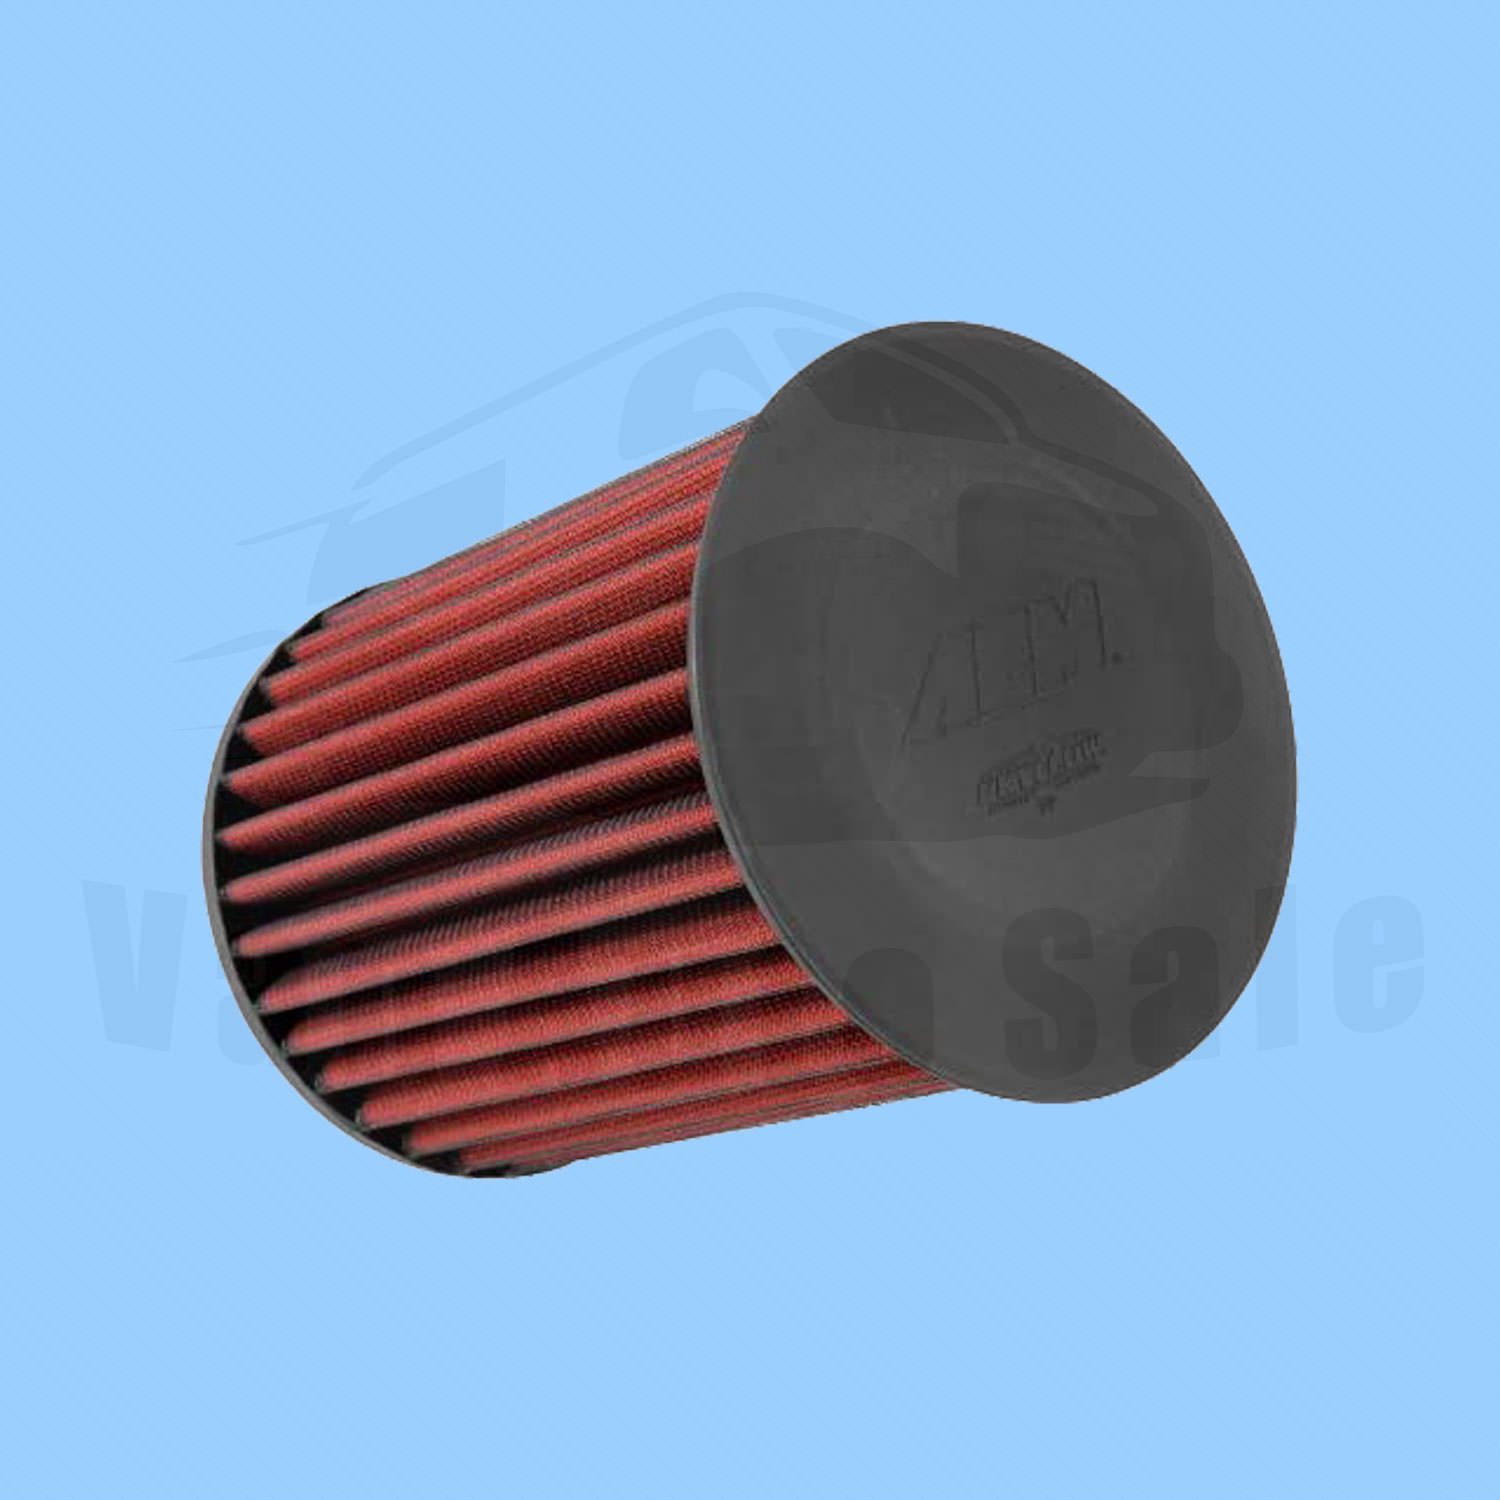 Air Filter AEM for Ford Transit Connect 2014-2016 | eBay 2016 Ford Transit Connect Cabin Air Filter